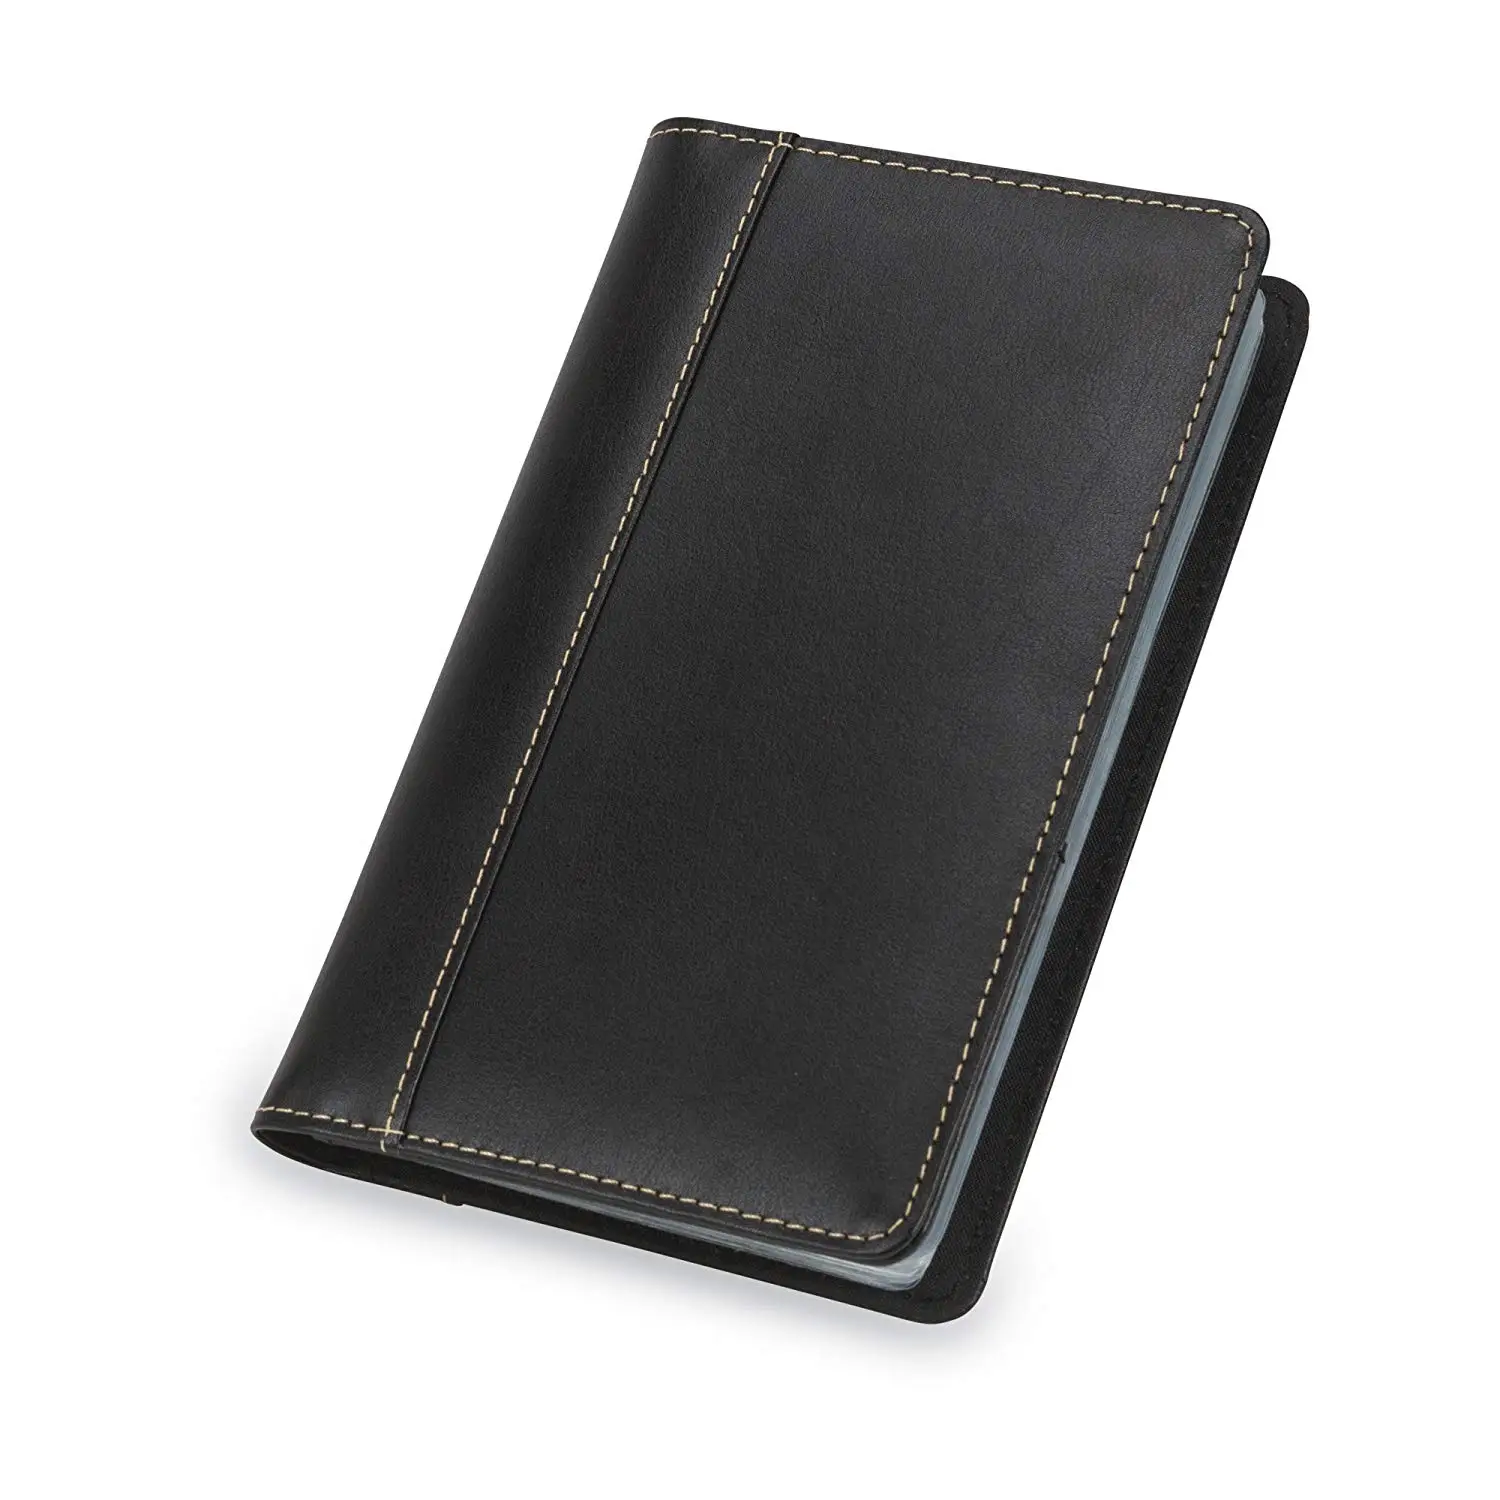 Business Card Holder Holds 300 Cards Pu Leather Business Card Case